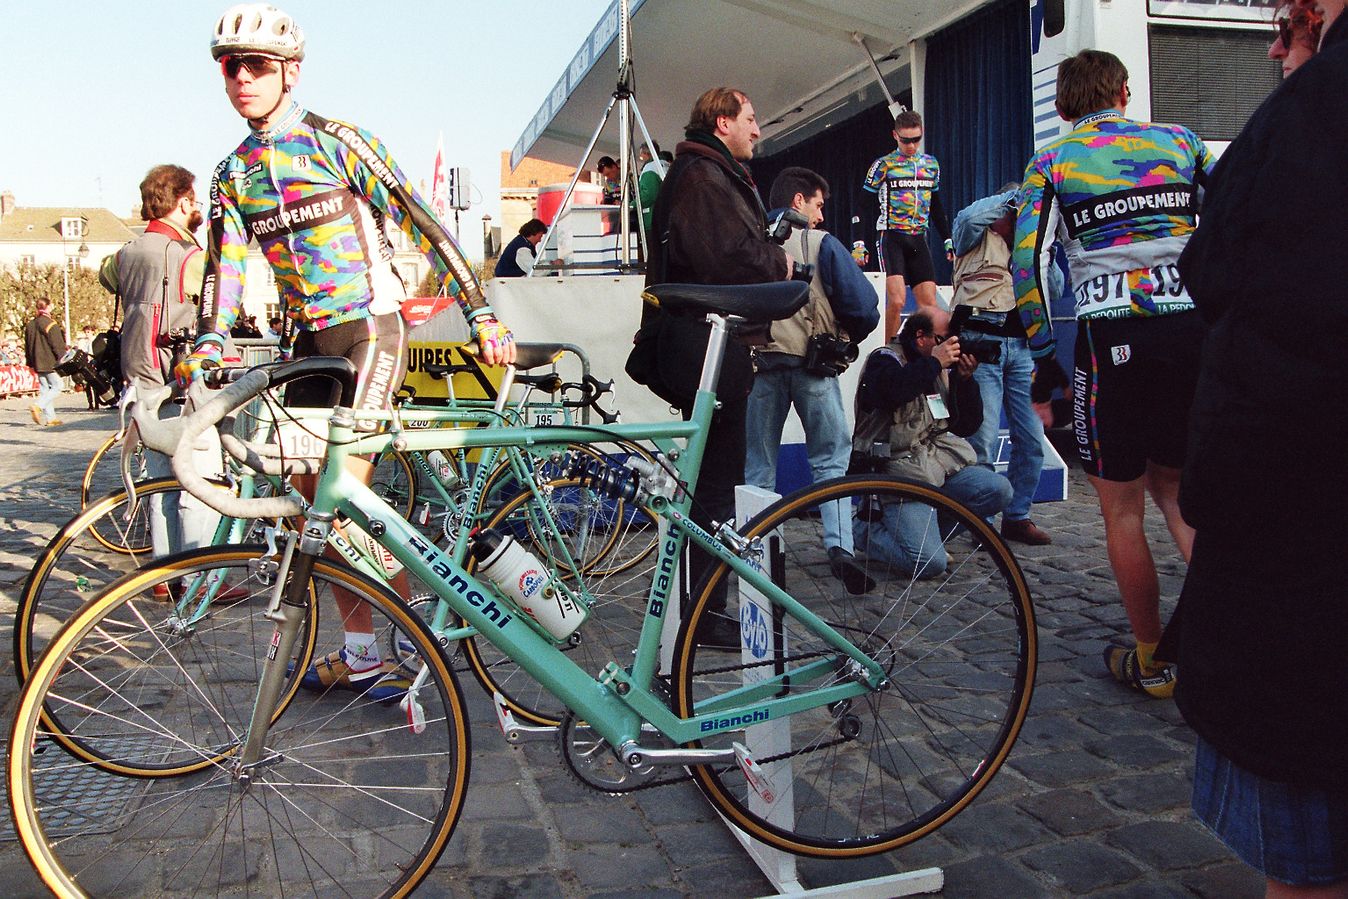 The short-lived Le Groupement team with Bianchi bikes